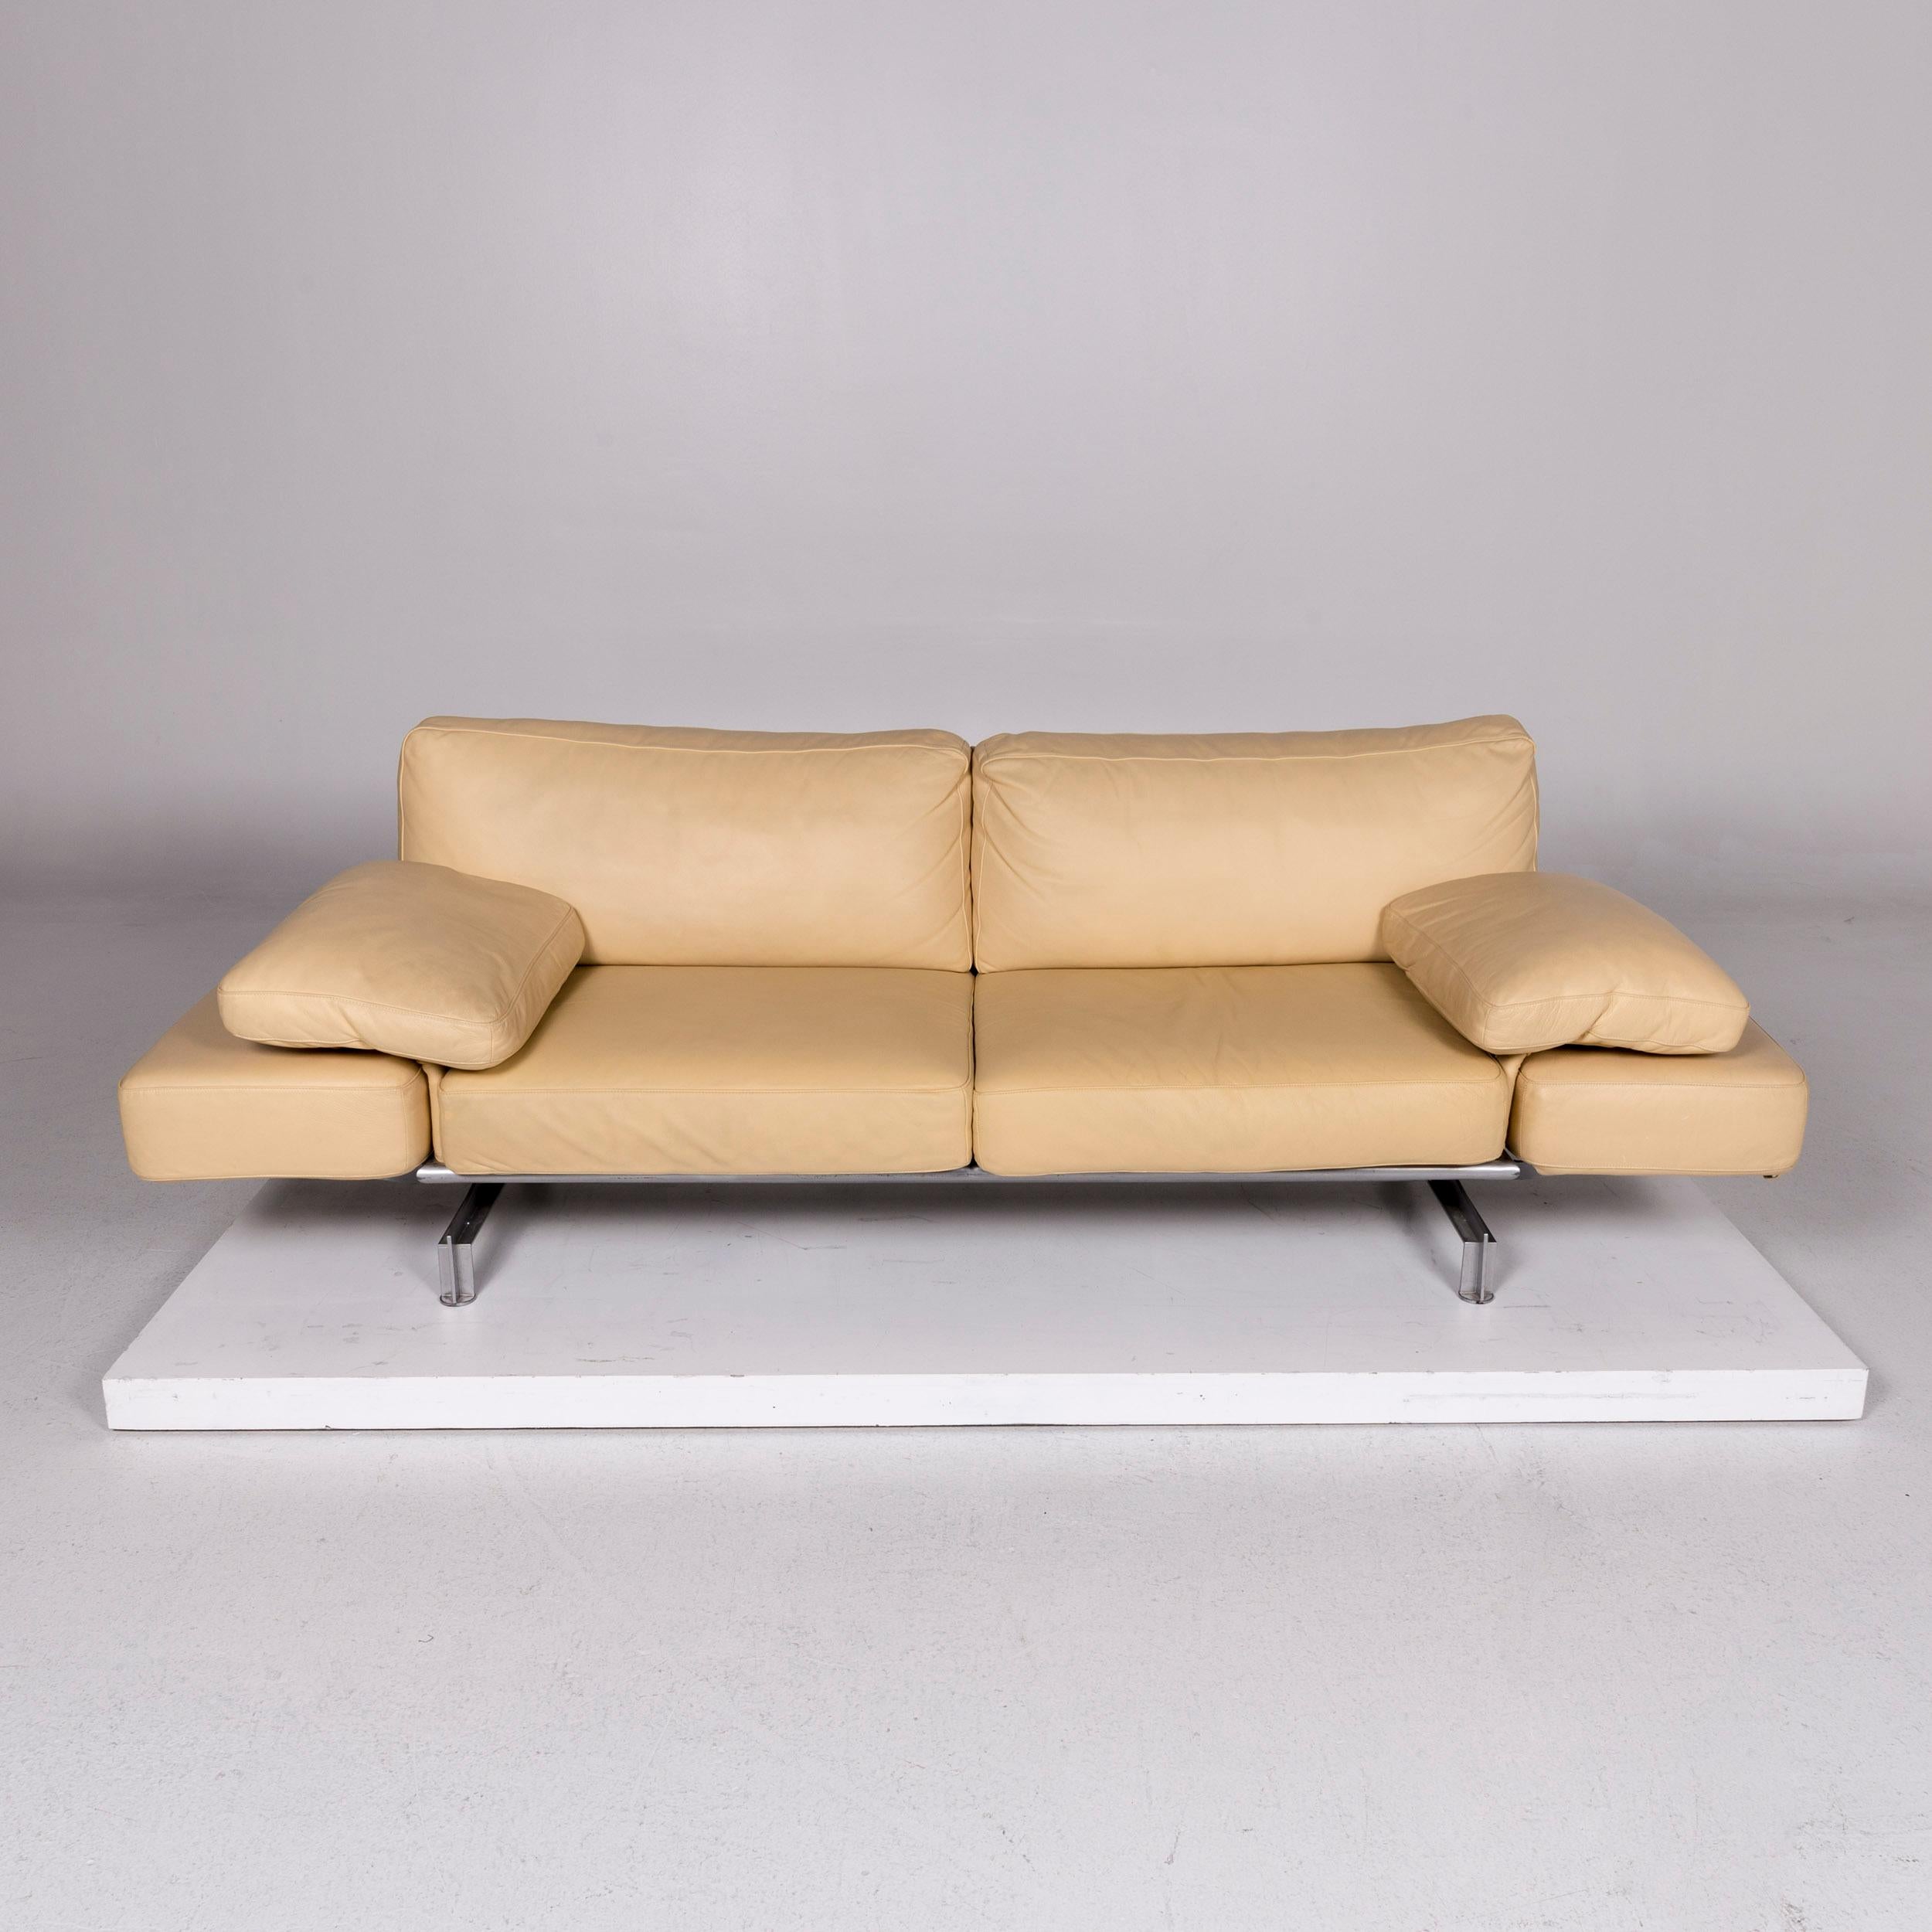 WK Wohnen Gaetano 687 Leather Sofa Beige Two-Seat Function Relaxation Couch For Sale 1